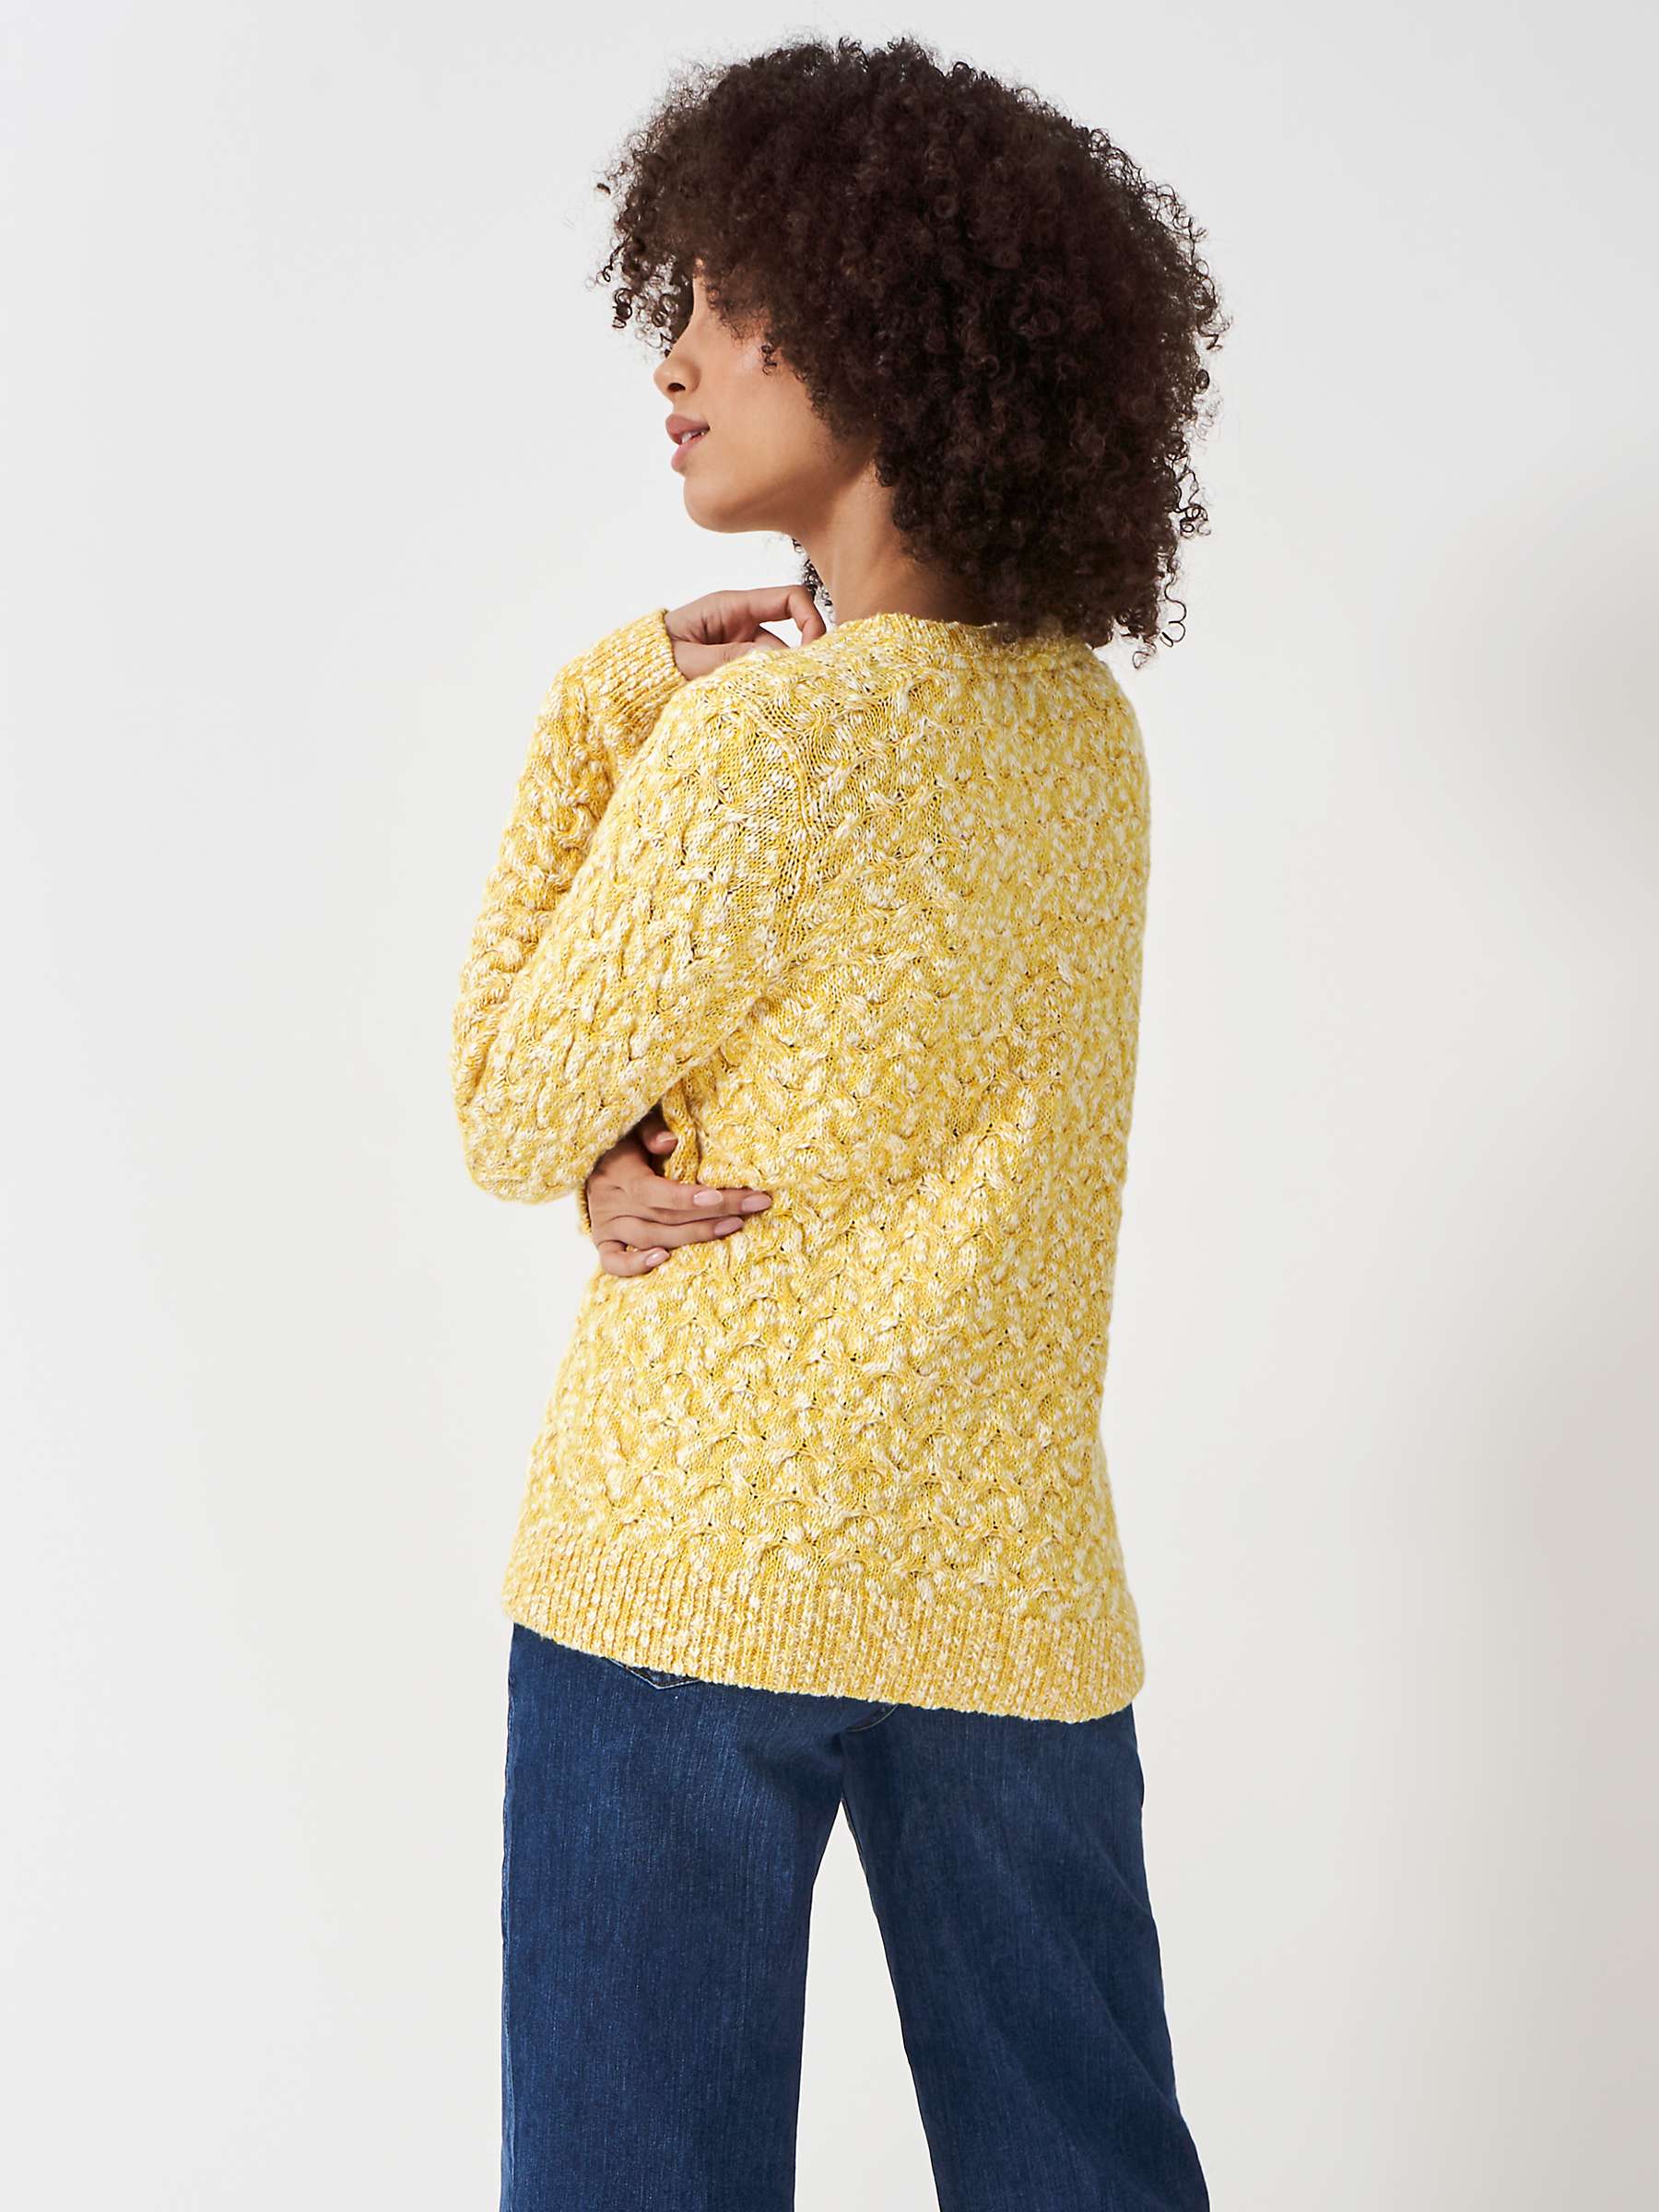 Buy Crew Clothing Twist Yarn Wool Blend Cable Knit Jumper Online at johnlewis.com